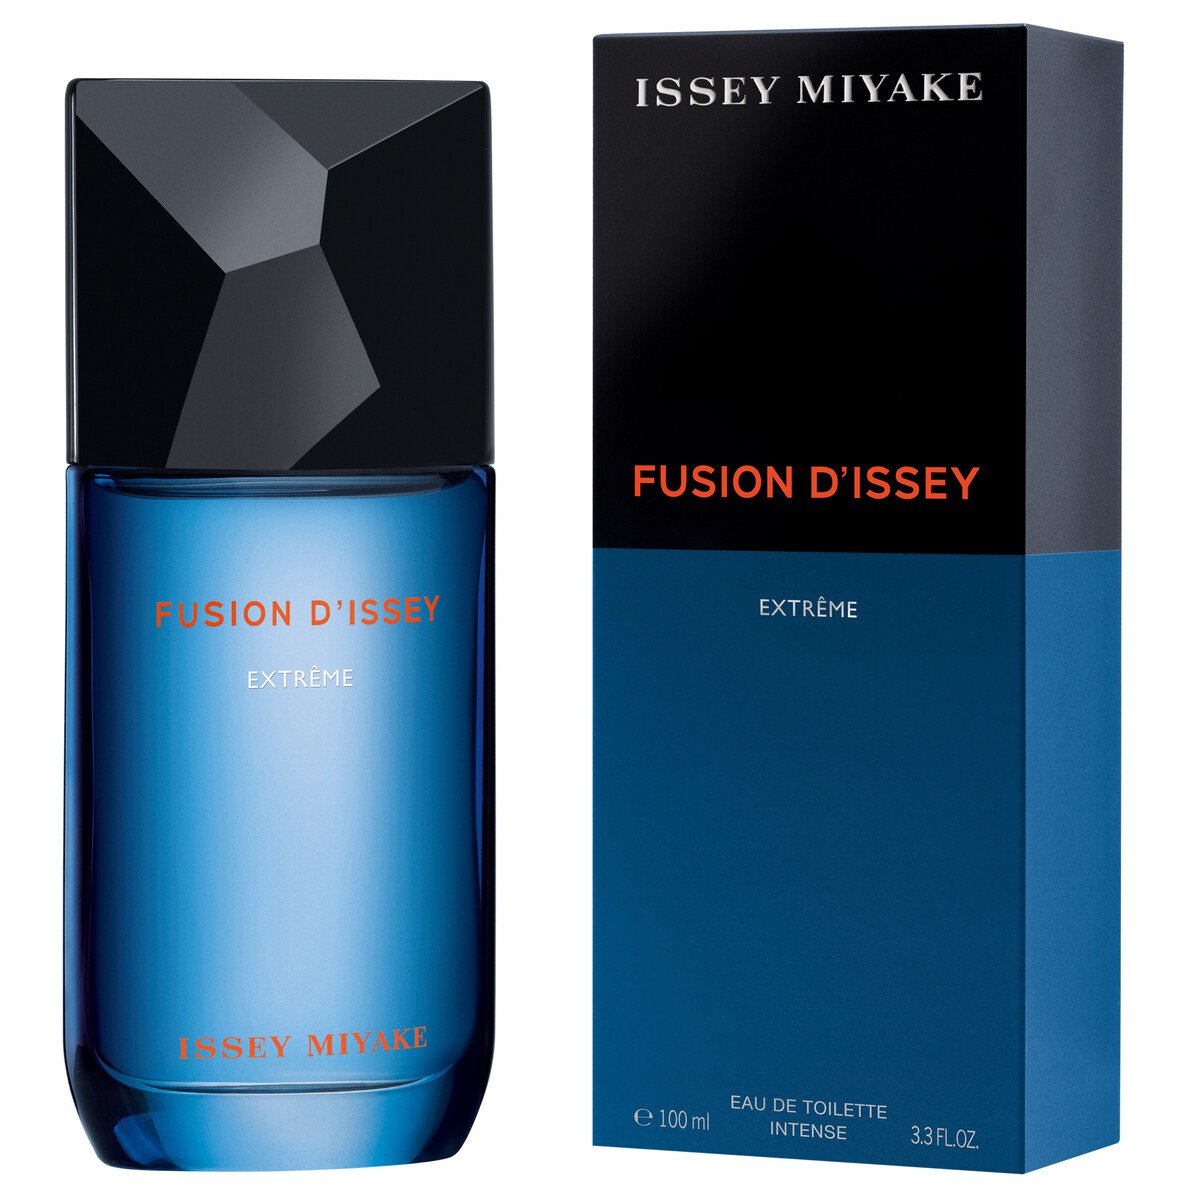 Fusion d'Issey Extrême by Issey Miyake » Reviews & Perfume Facts